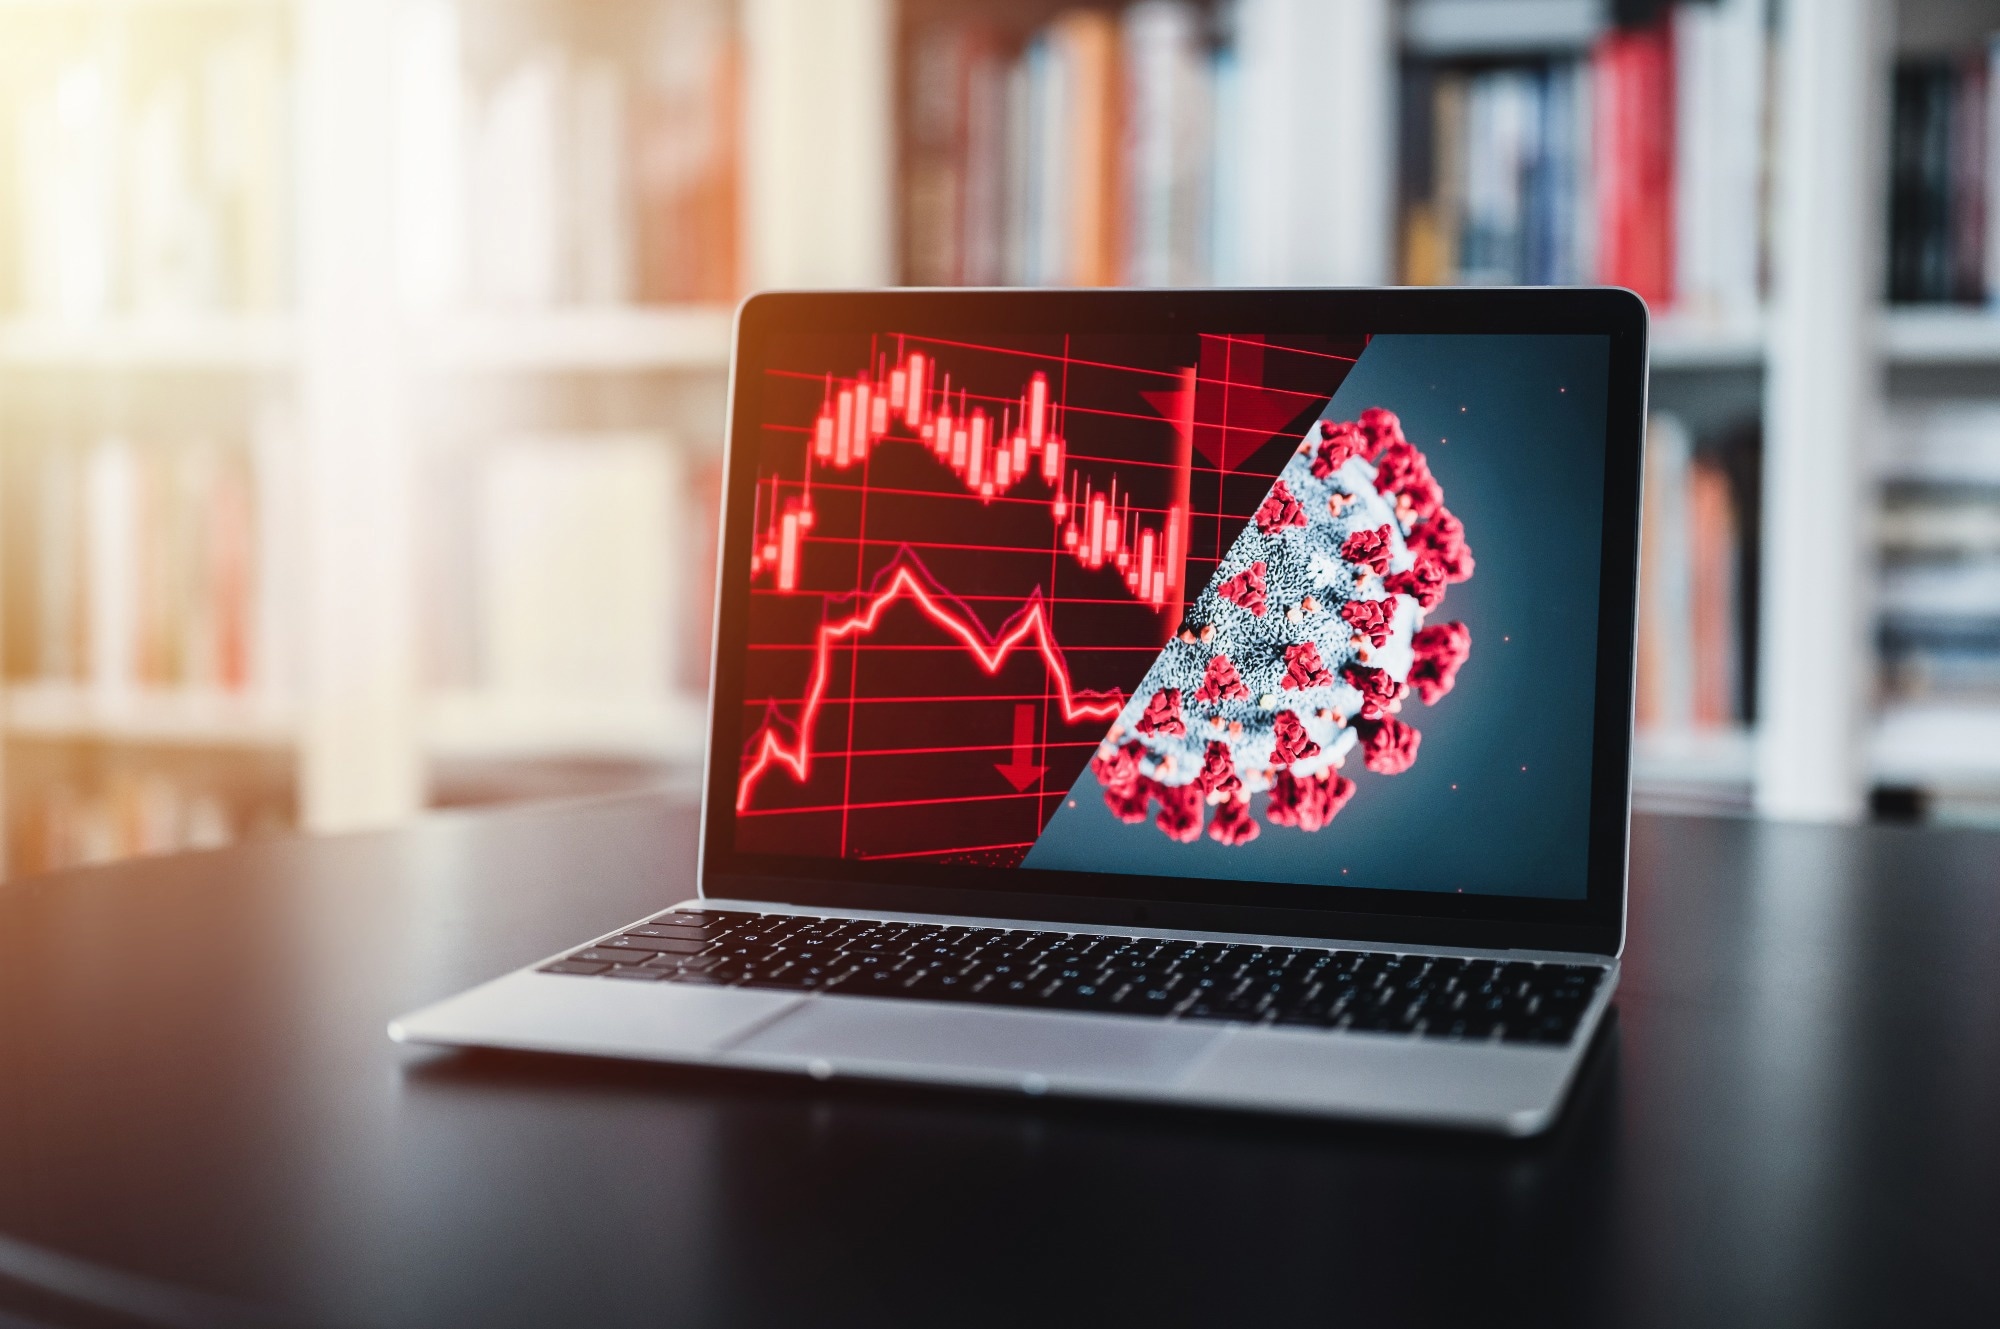 Study: Predicting the spread of SARS-CoV-2 variants: An artificial intelligence-enabled early detection. Image Credit: Peter Kneiz / Shutterstock.com